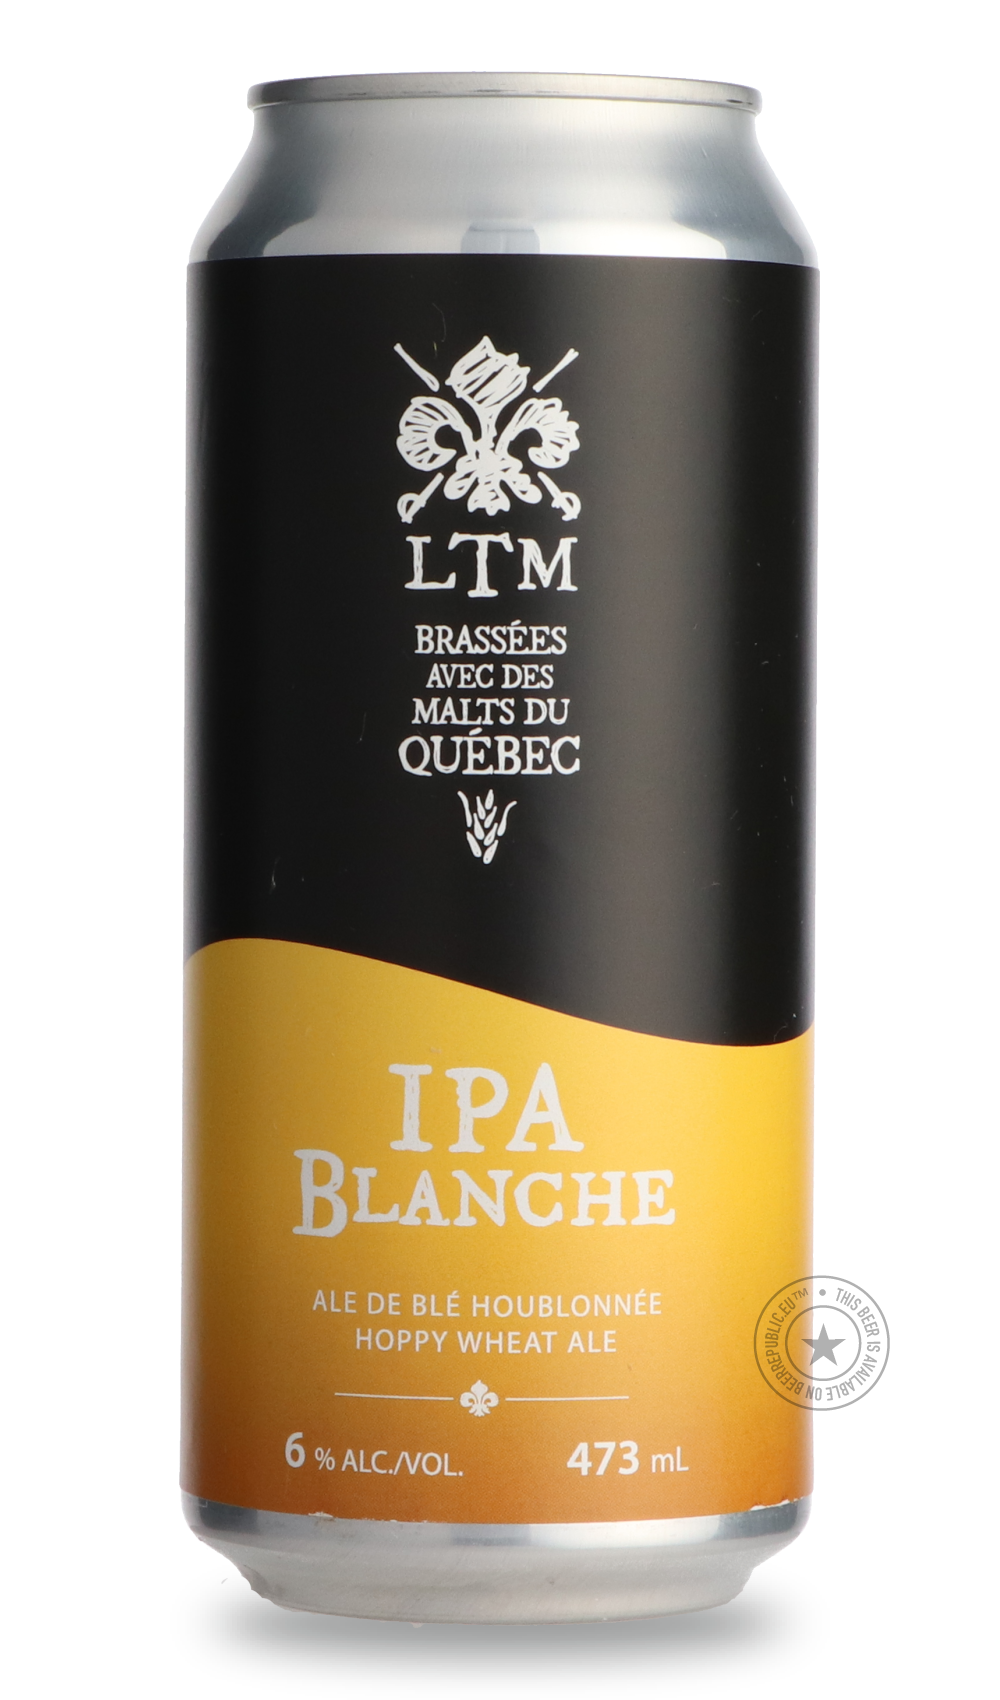 -Les Trois Mousquetaires- IPA Blanche-IPA- Only @ Beer Republic - The best online beer store for American & Canadian craft beer - Buy beer online from the USA and Canada - Bier online kopen - Amerikaans bier kopen - Craft beer store - Craft beer kopen - Amerikanisch bier kaufen - Bier online kaufen - Acheter biere online - IPA - Stout - Porter - New England IPA - Hazy IPA - Imperial Stout - Barrel Aged - Barrel Aged Imperial Stout - Brown - Dark beer - Blond - Blonde - Pilsner - Lager - Wheat - Weizen - Amb